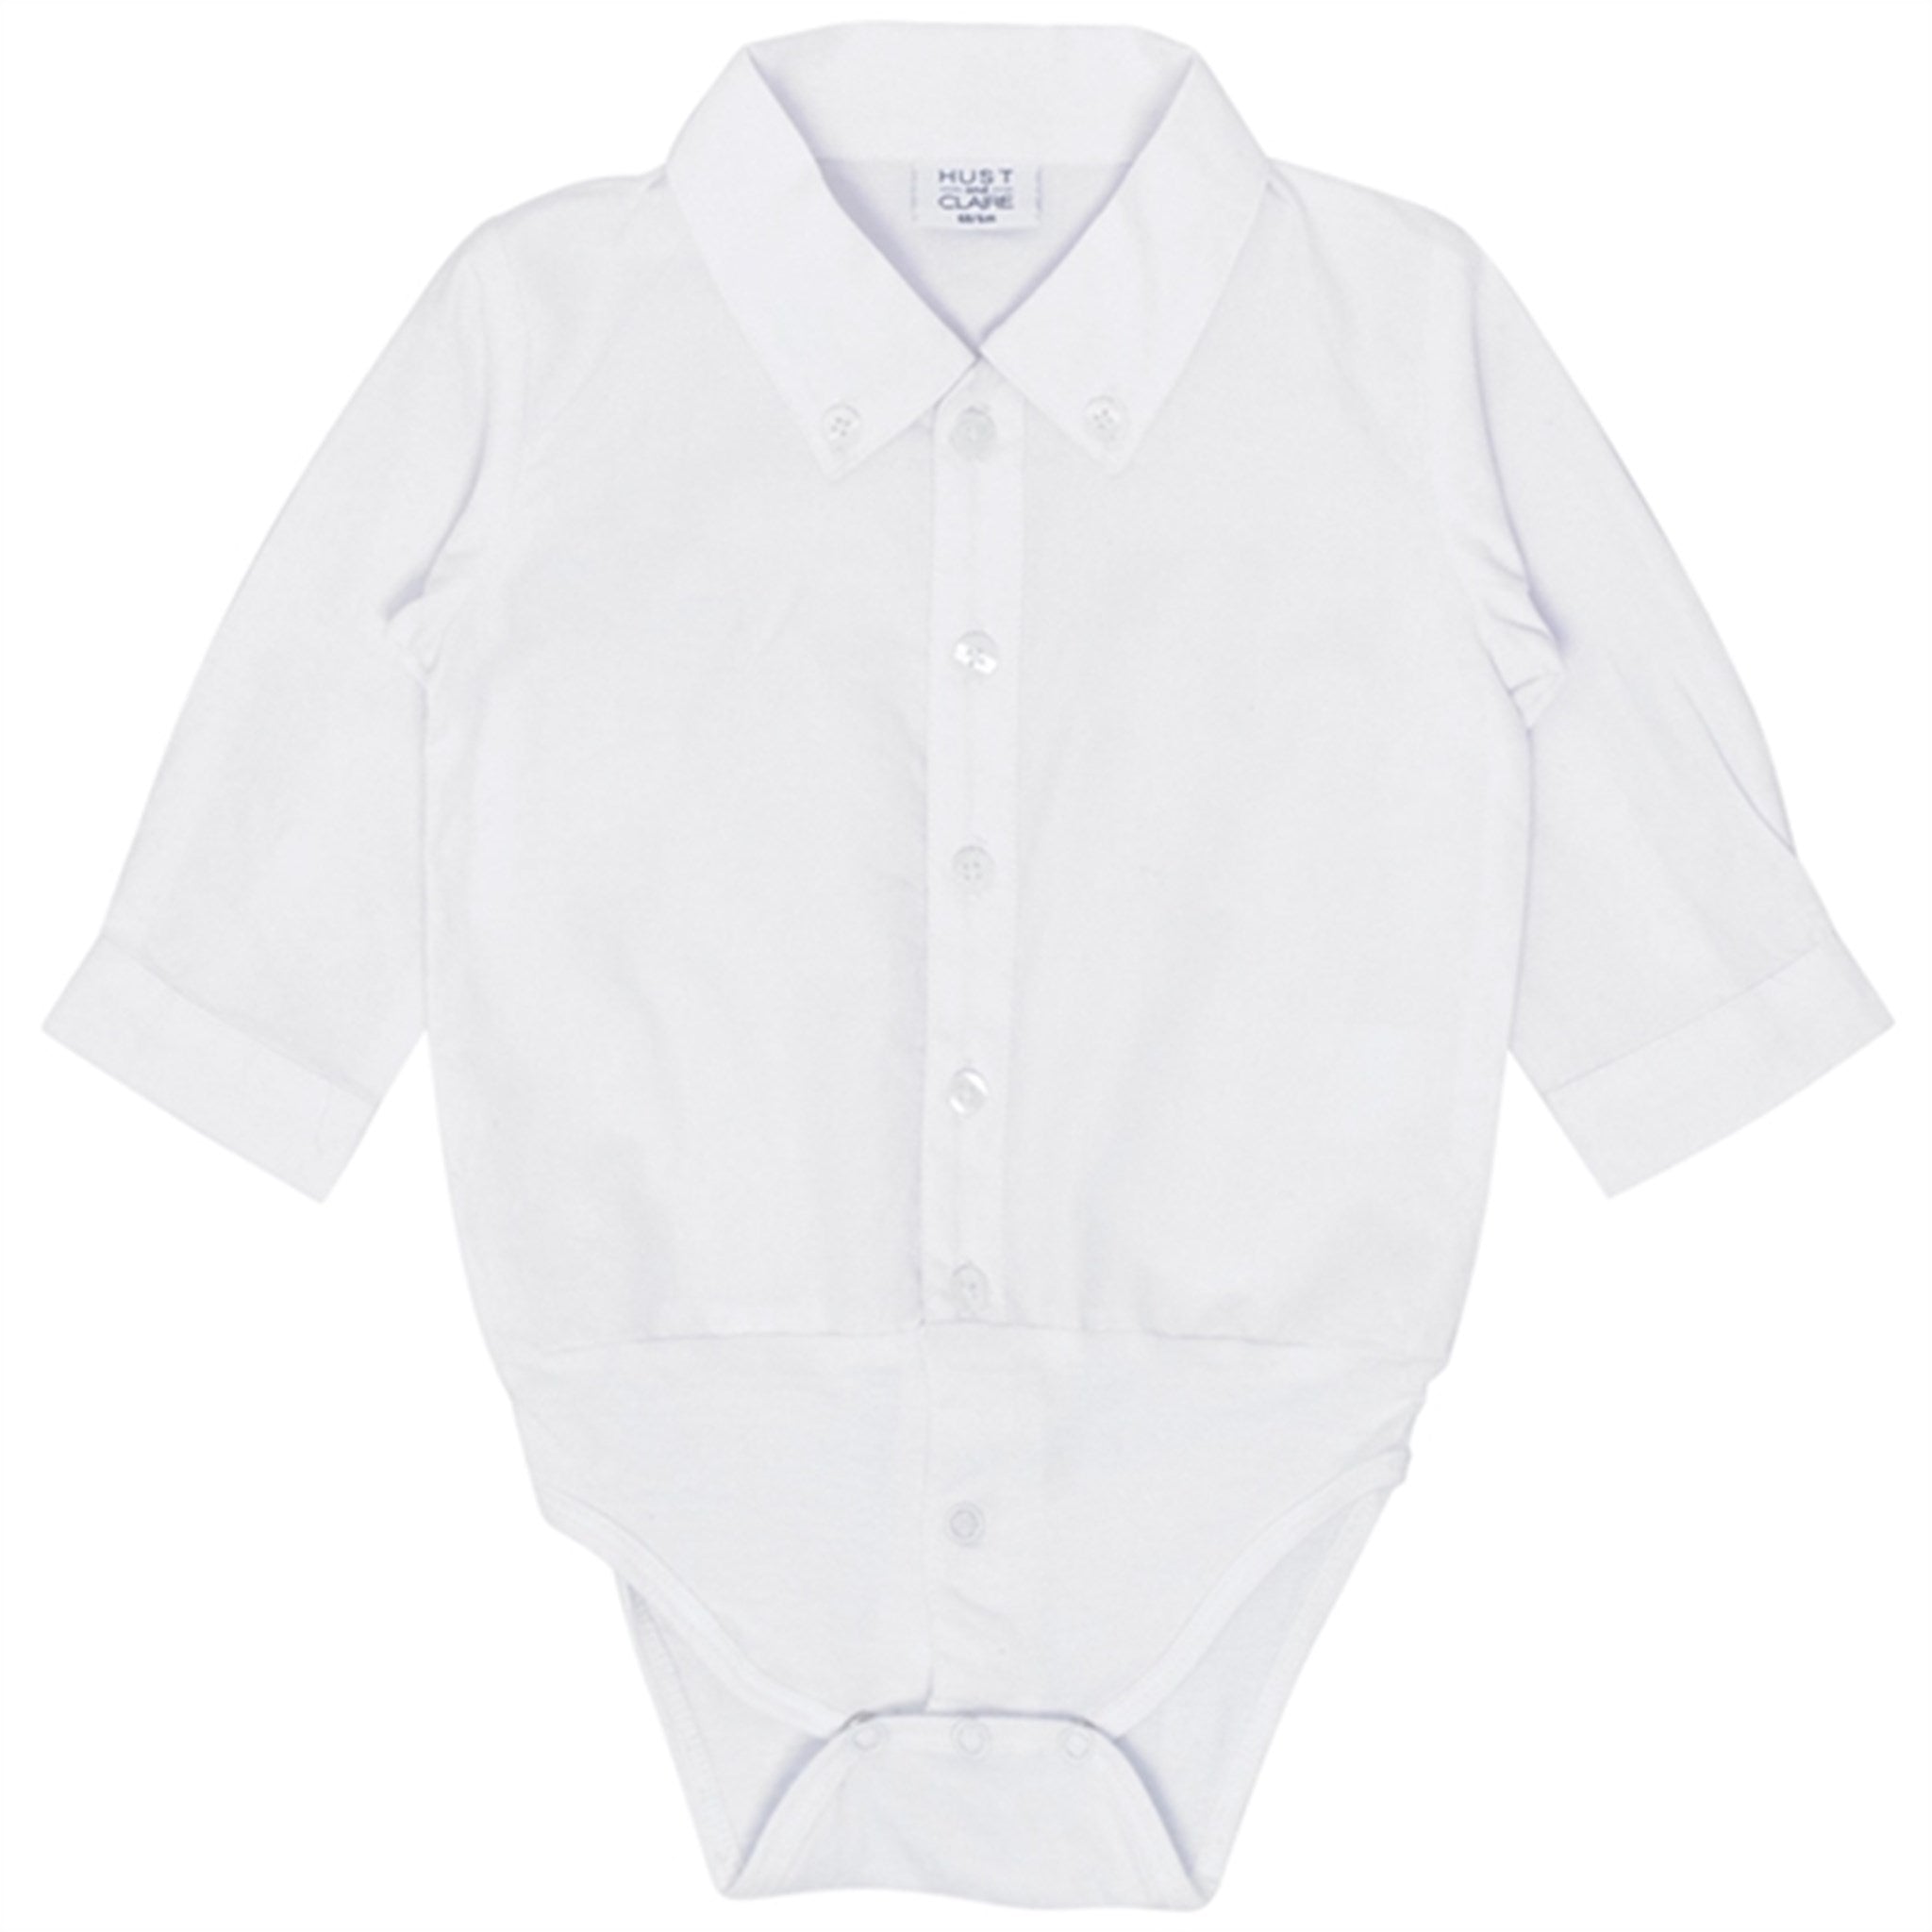 Hust & Claire Baby White Birger Shirt Body